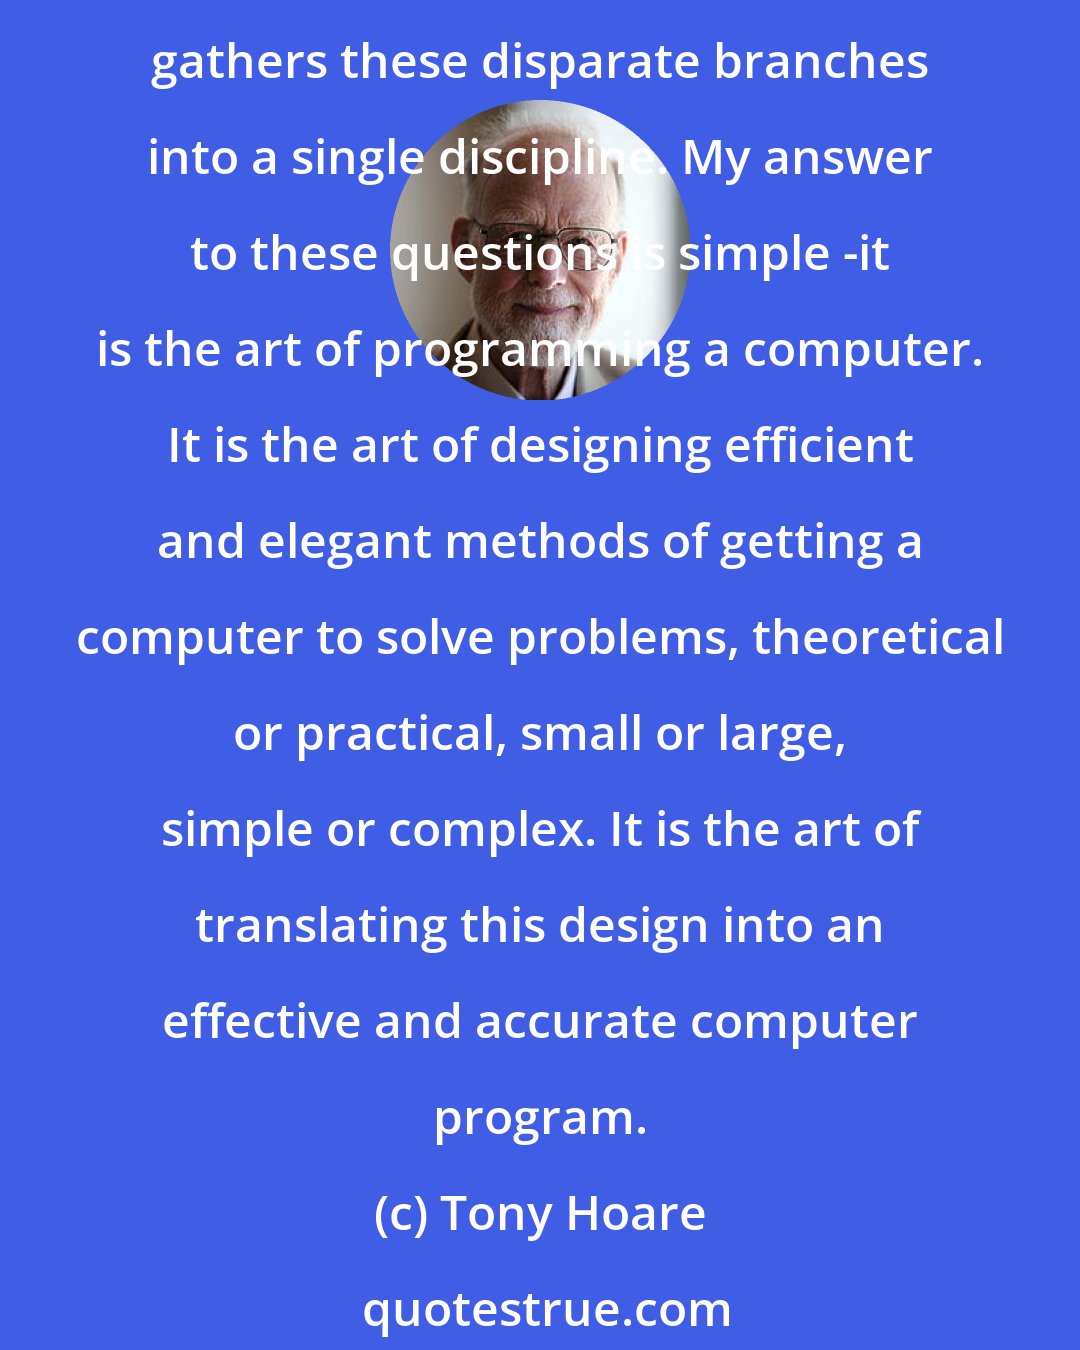 Tony Hoare: What is the central core of the subject [computer science]? What is it that distinguishes it from the separate subjects with which it is related? What is the linking thread which gathers these disparate branches into a single discipline. My answer to these questions is simple -it is the art of programming a computer. It is the art of designing efficient and elegant methods of getting a computer to solve problems, theoretical or practical, small or large, simple or complex. It is the art of translating this design into an effective and accurate computer program.